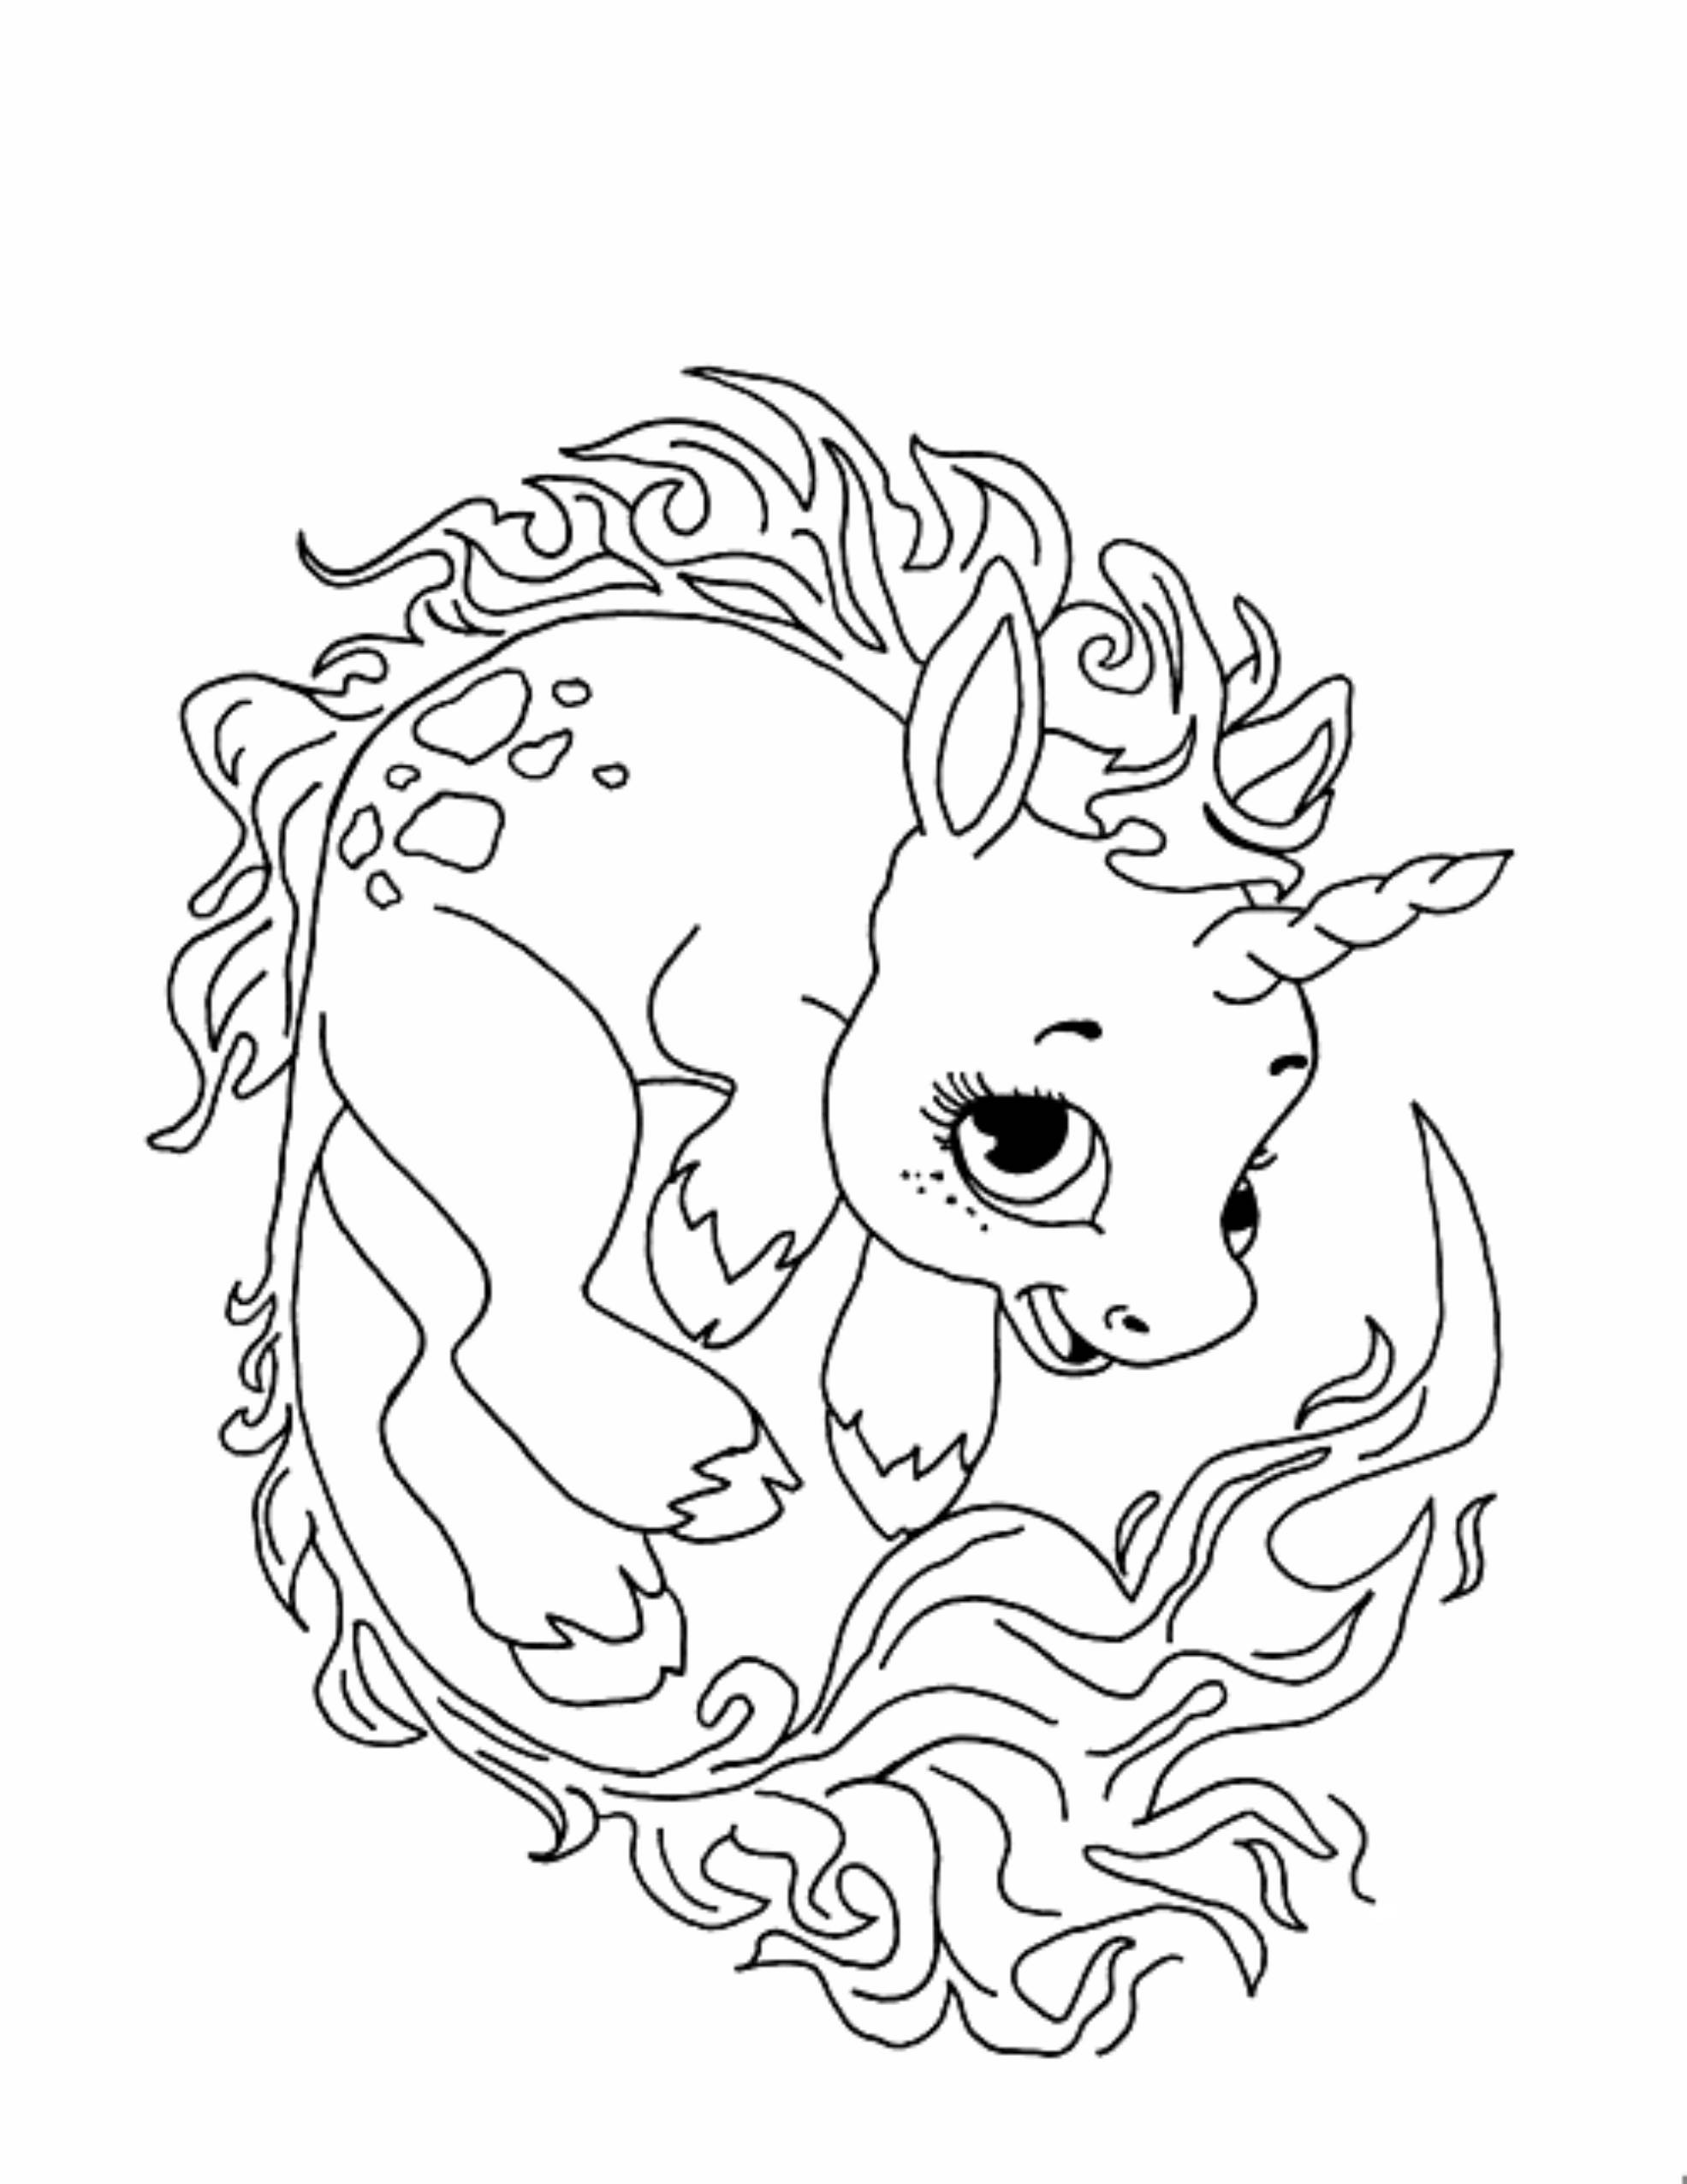 Cute Unicorn Coloring Pages For Kids
 Unicorn Coloring Pages for Children – Best Apps For Kids